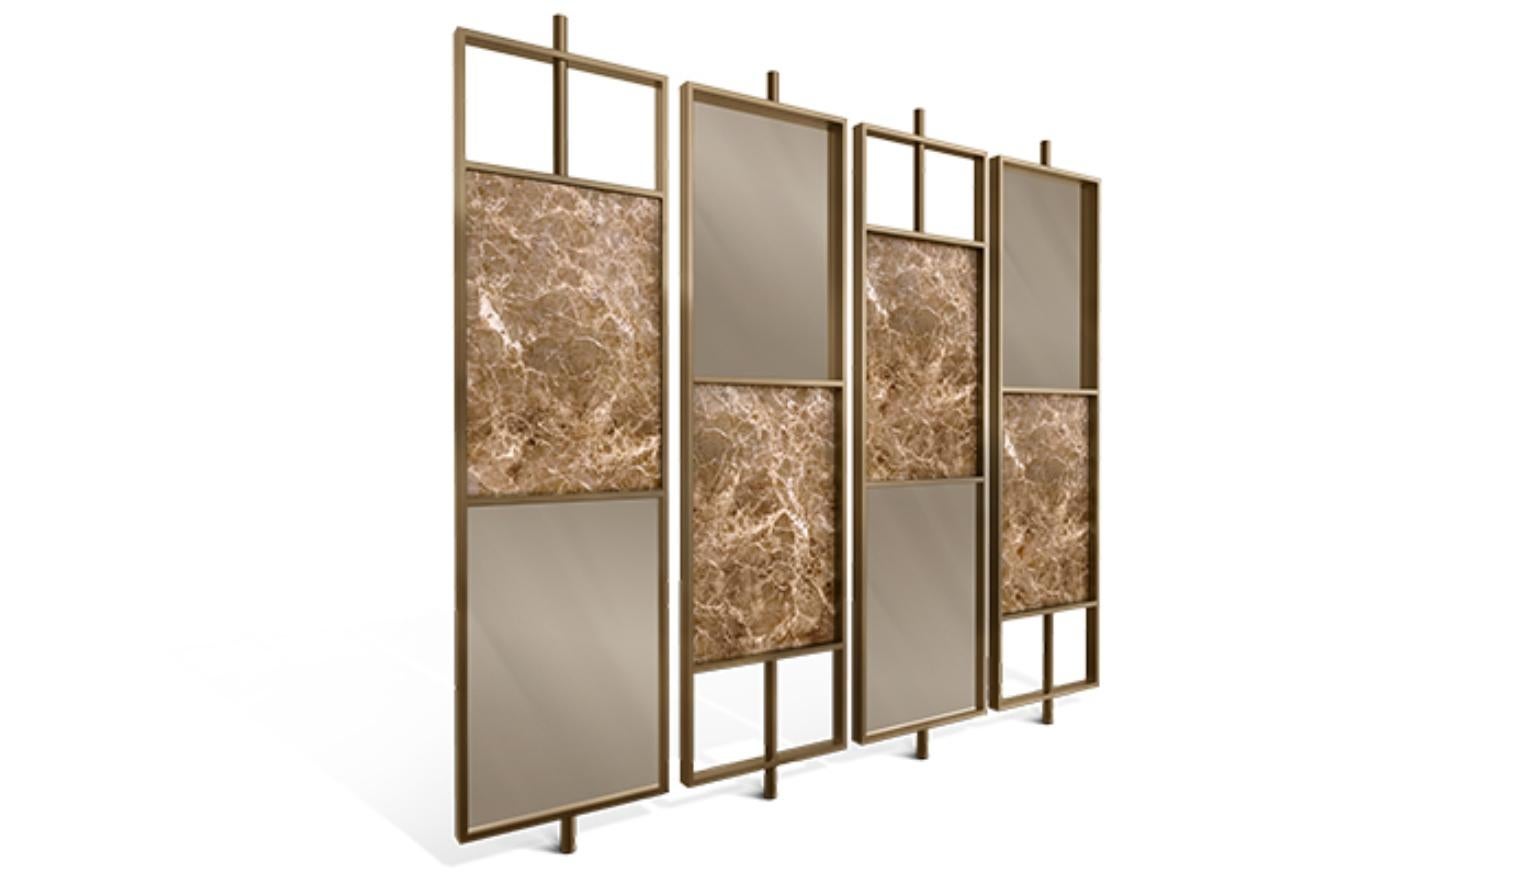 Modern Arabica Bronze Mirror and Emperador Marble Screen by Caffe Latte

This Modern Arabica Bronze Mirror and Emperador Marble Screen by Caffe Latte is a striking piece of furniture made of emperador light marble, bronze mirror and epoxy iron